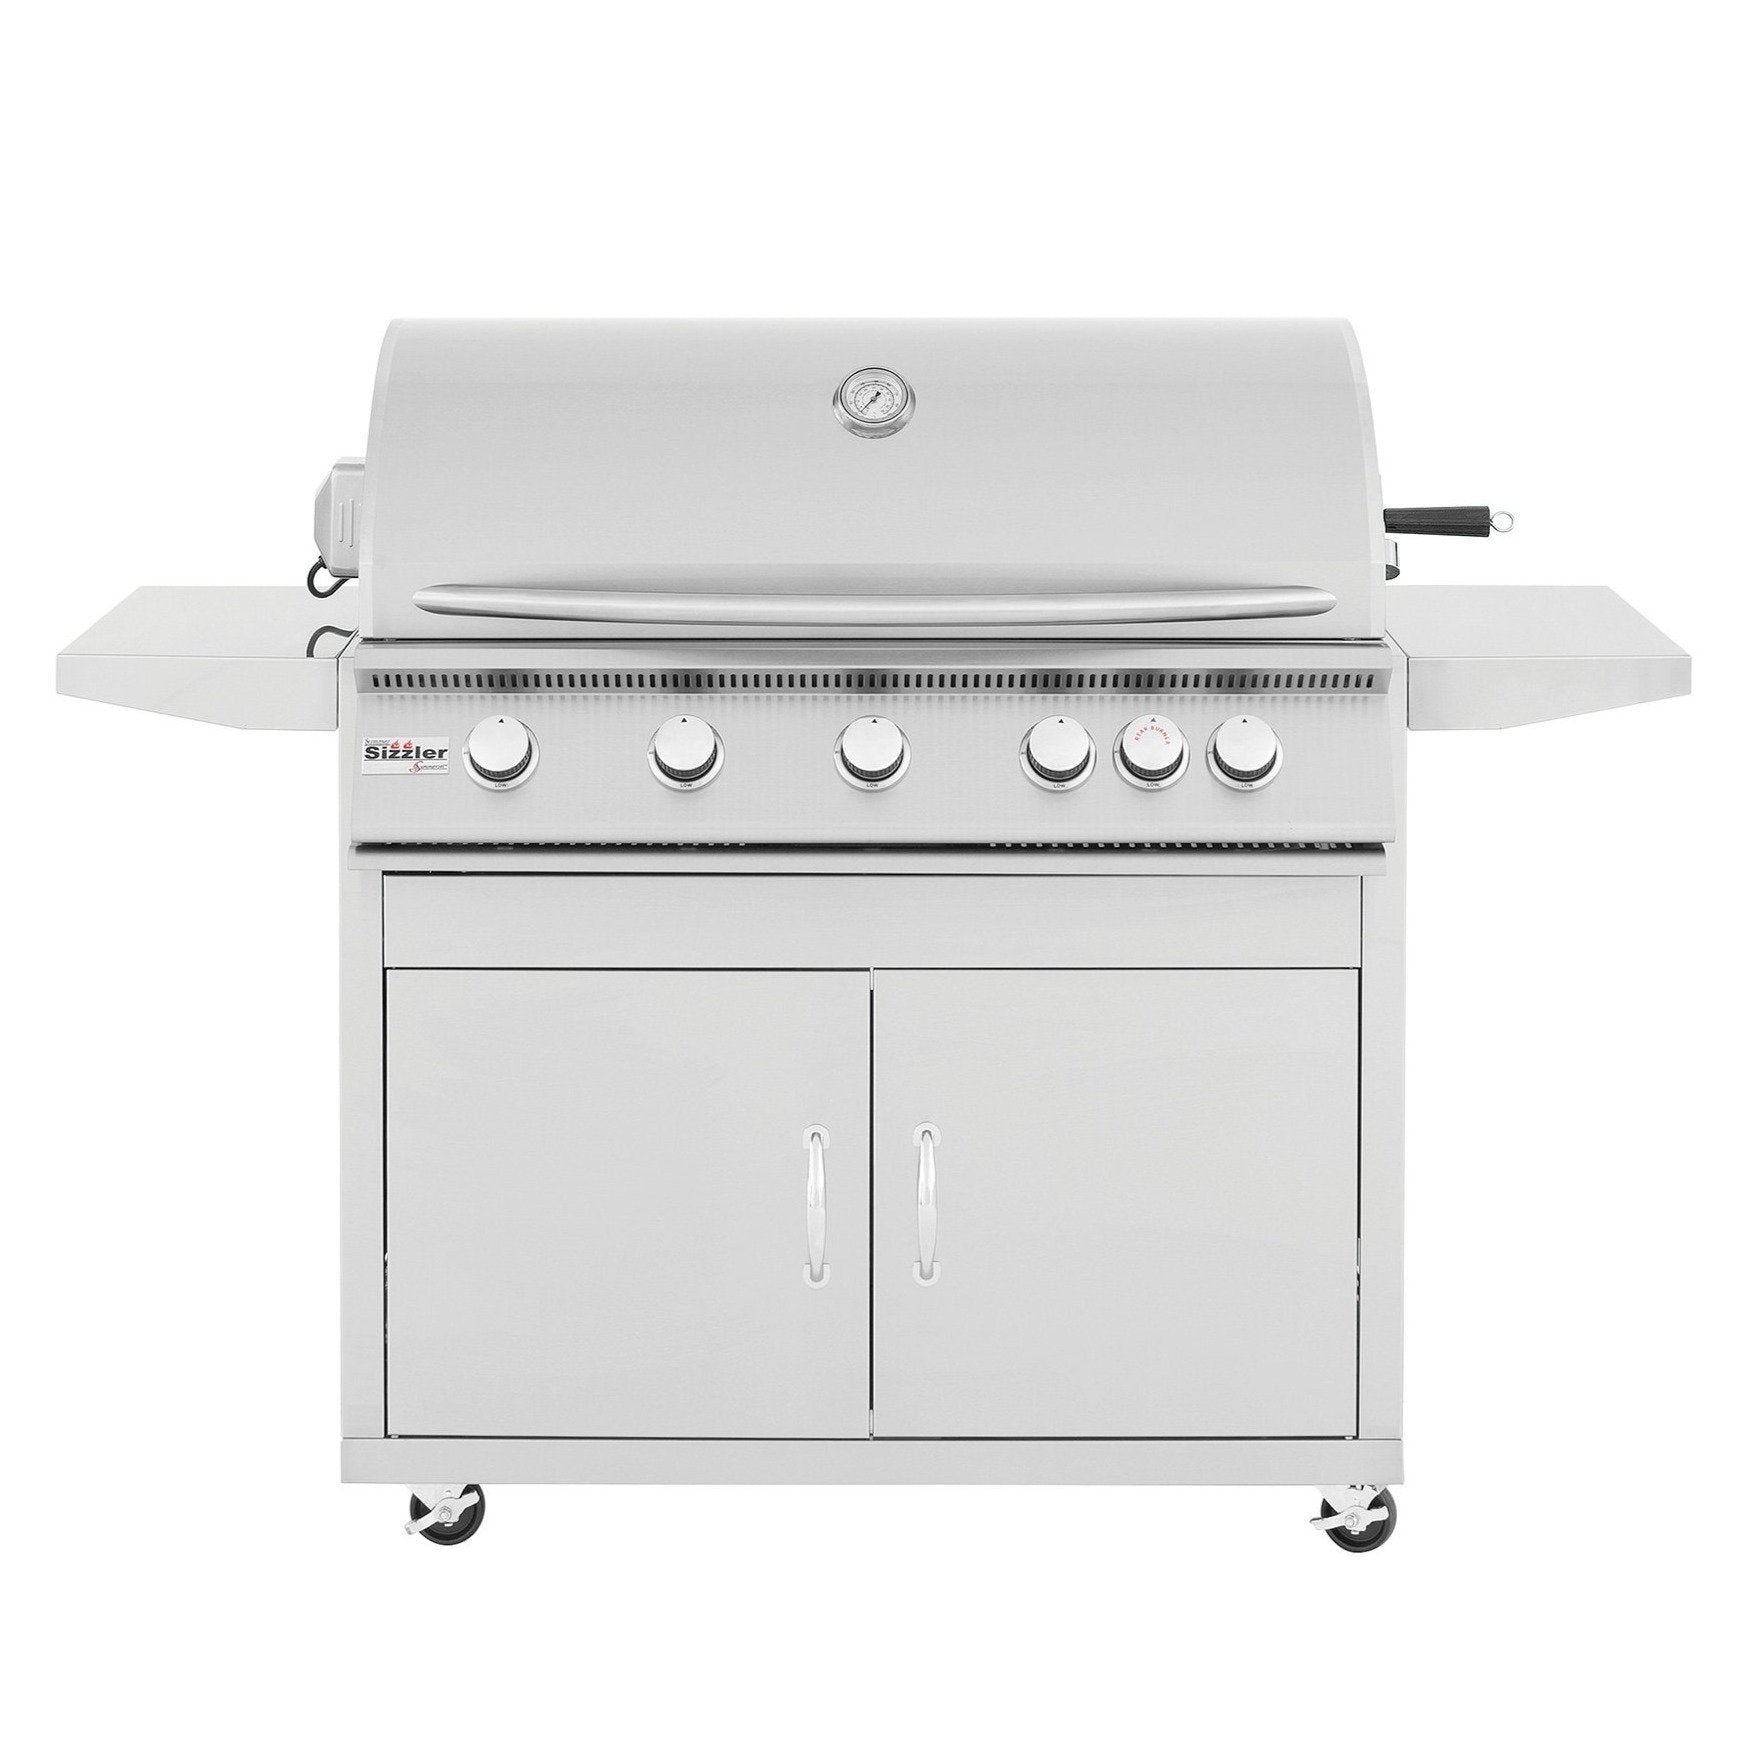 Summerset Freestanding Sizzler Series 40-Inch Gas Grill - SIZ40 - grillsNmore.com